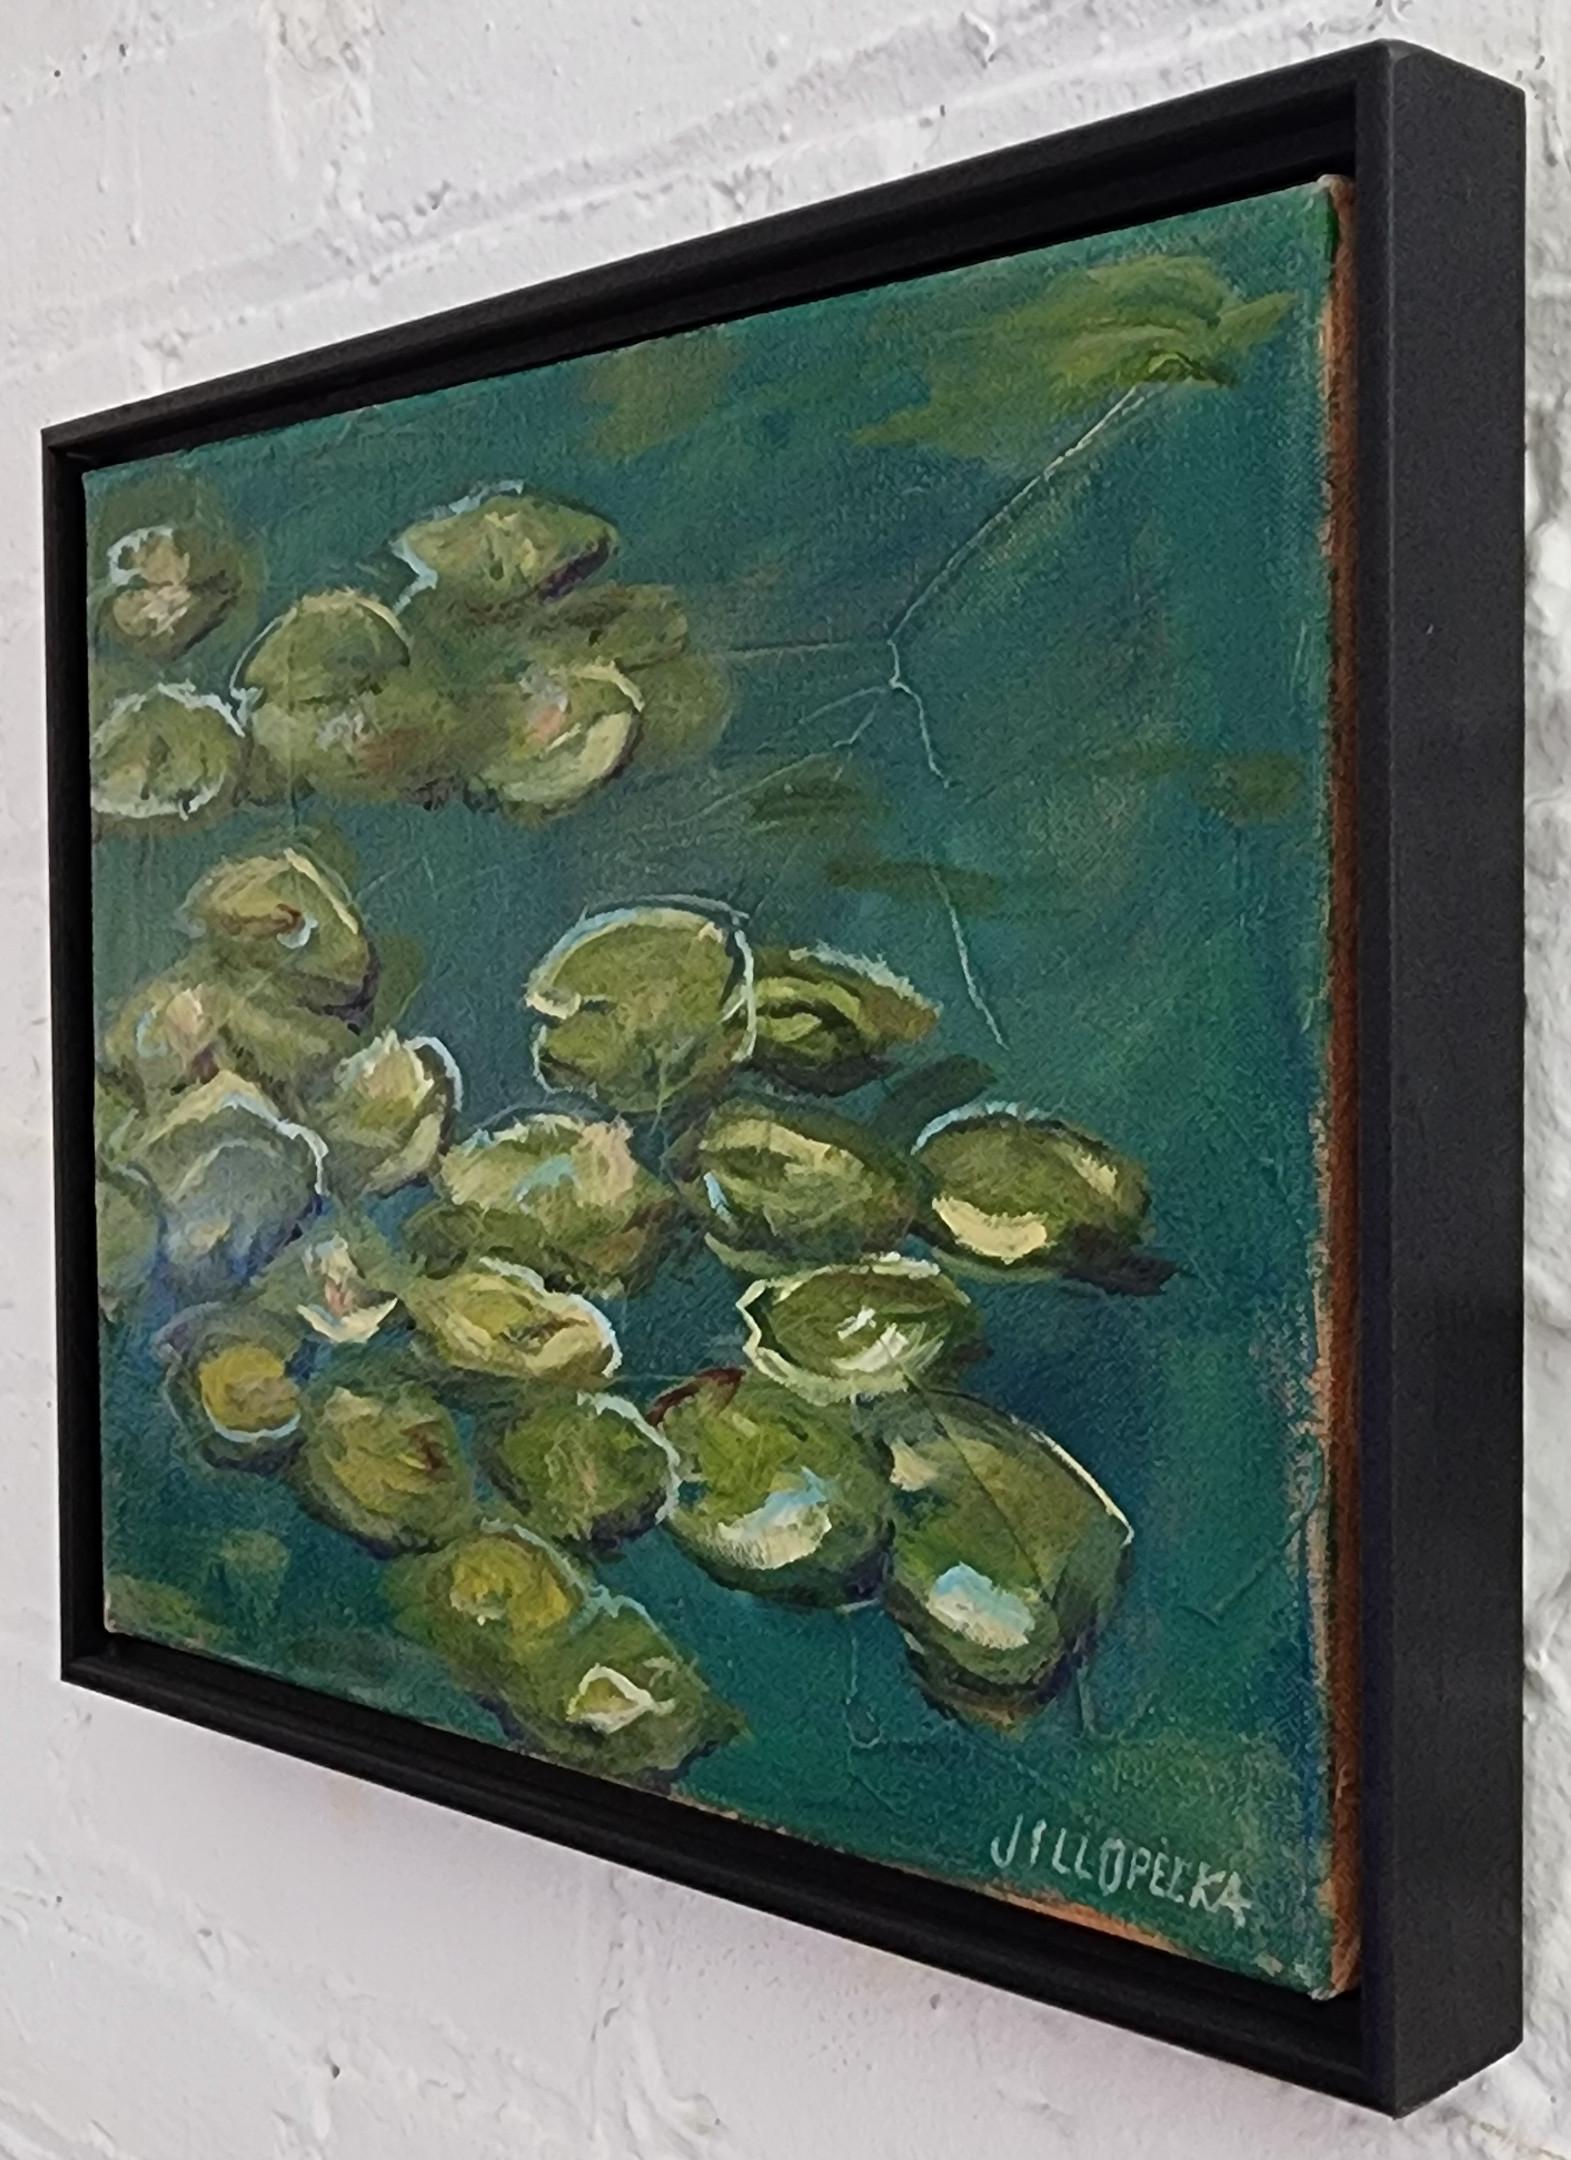 Lily Pads (Flowers, Waterscape, Green, Saturated) - Painting by Jill Opelka